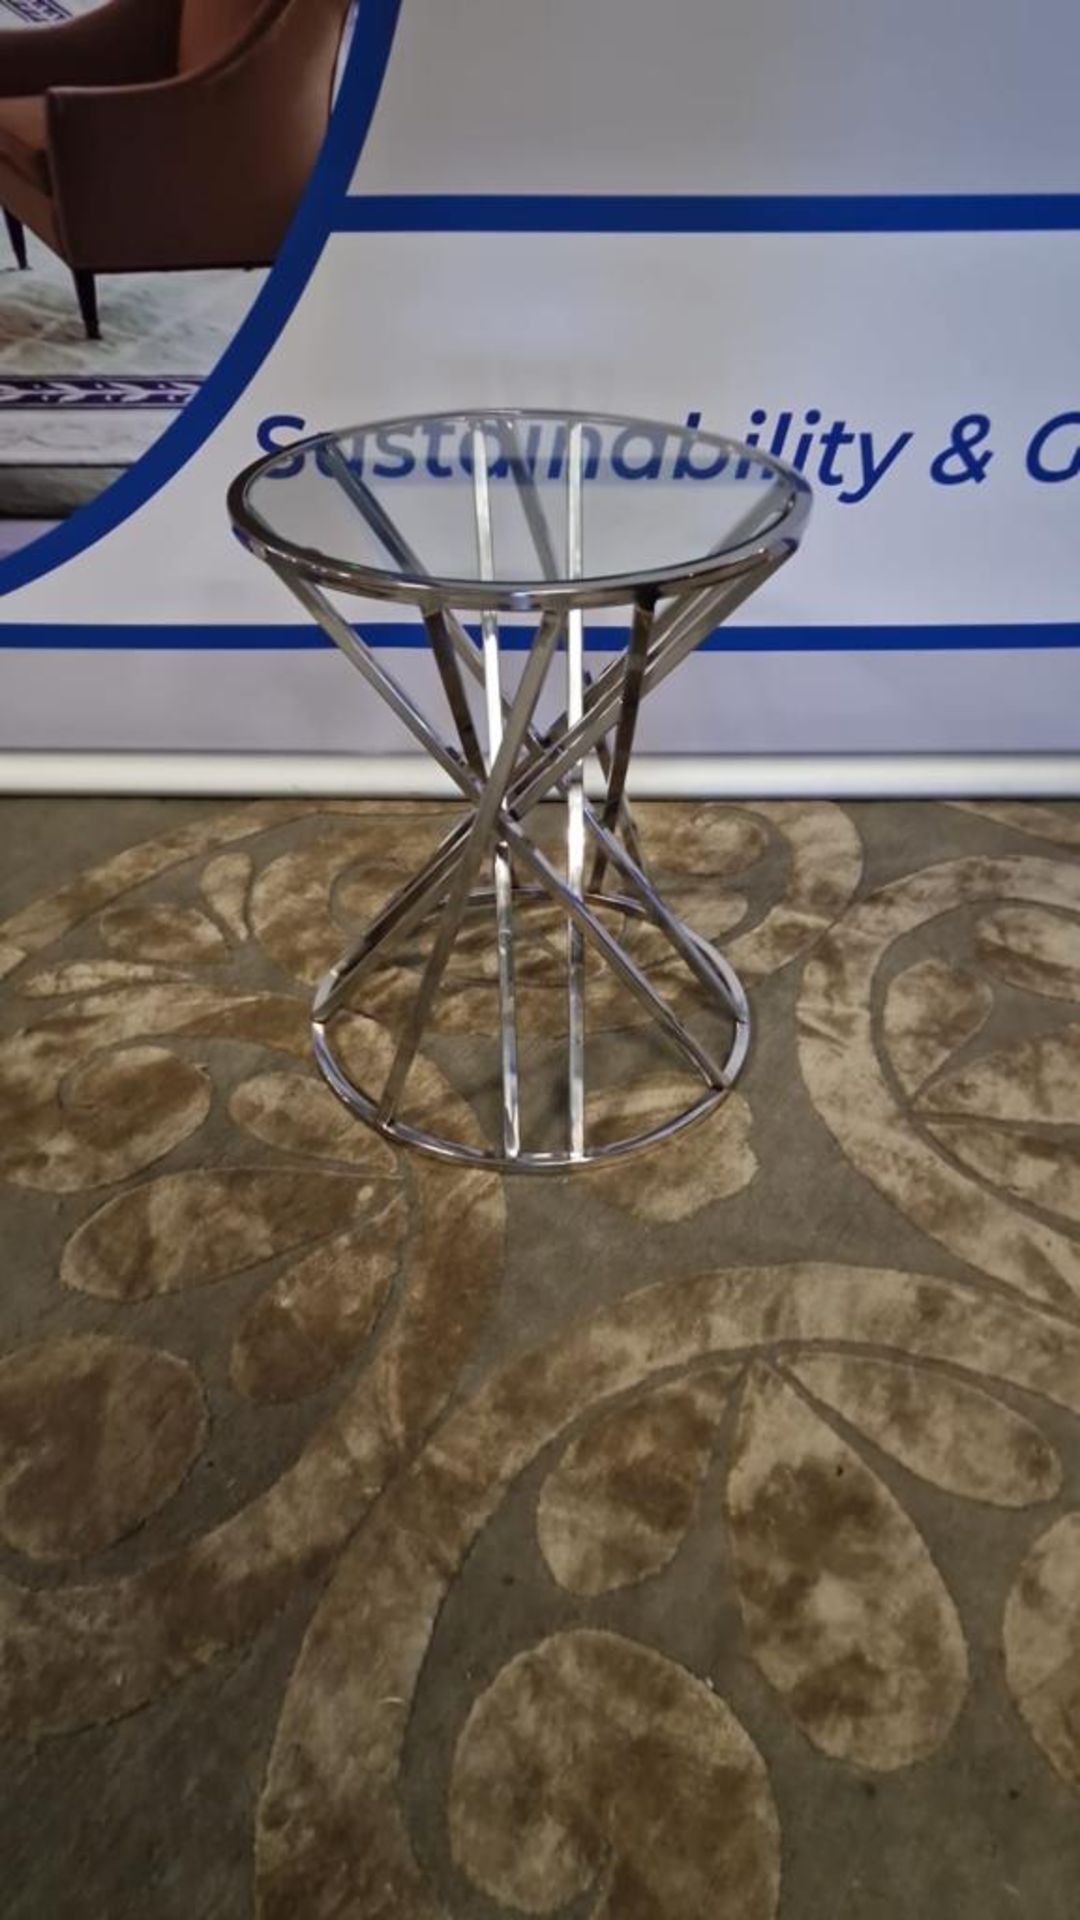 Stainless Steel End Table Stylishly Designed Stainless Steel Frame And A Sleek Tempered Glass - Bild 2 aus 2